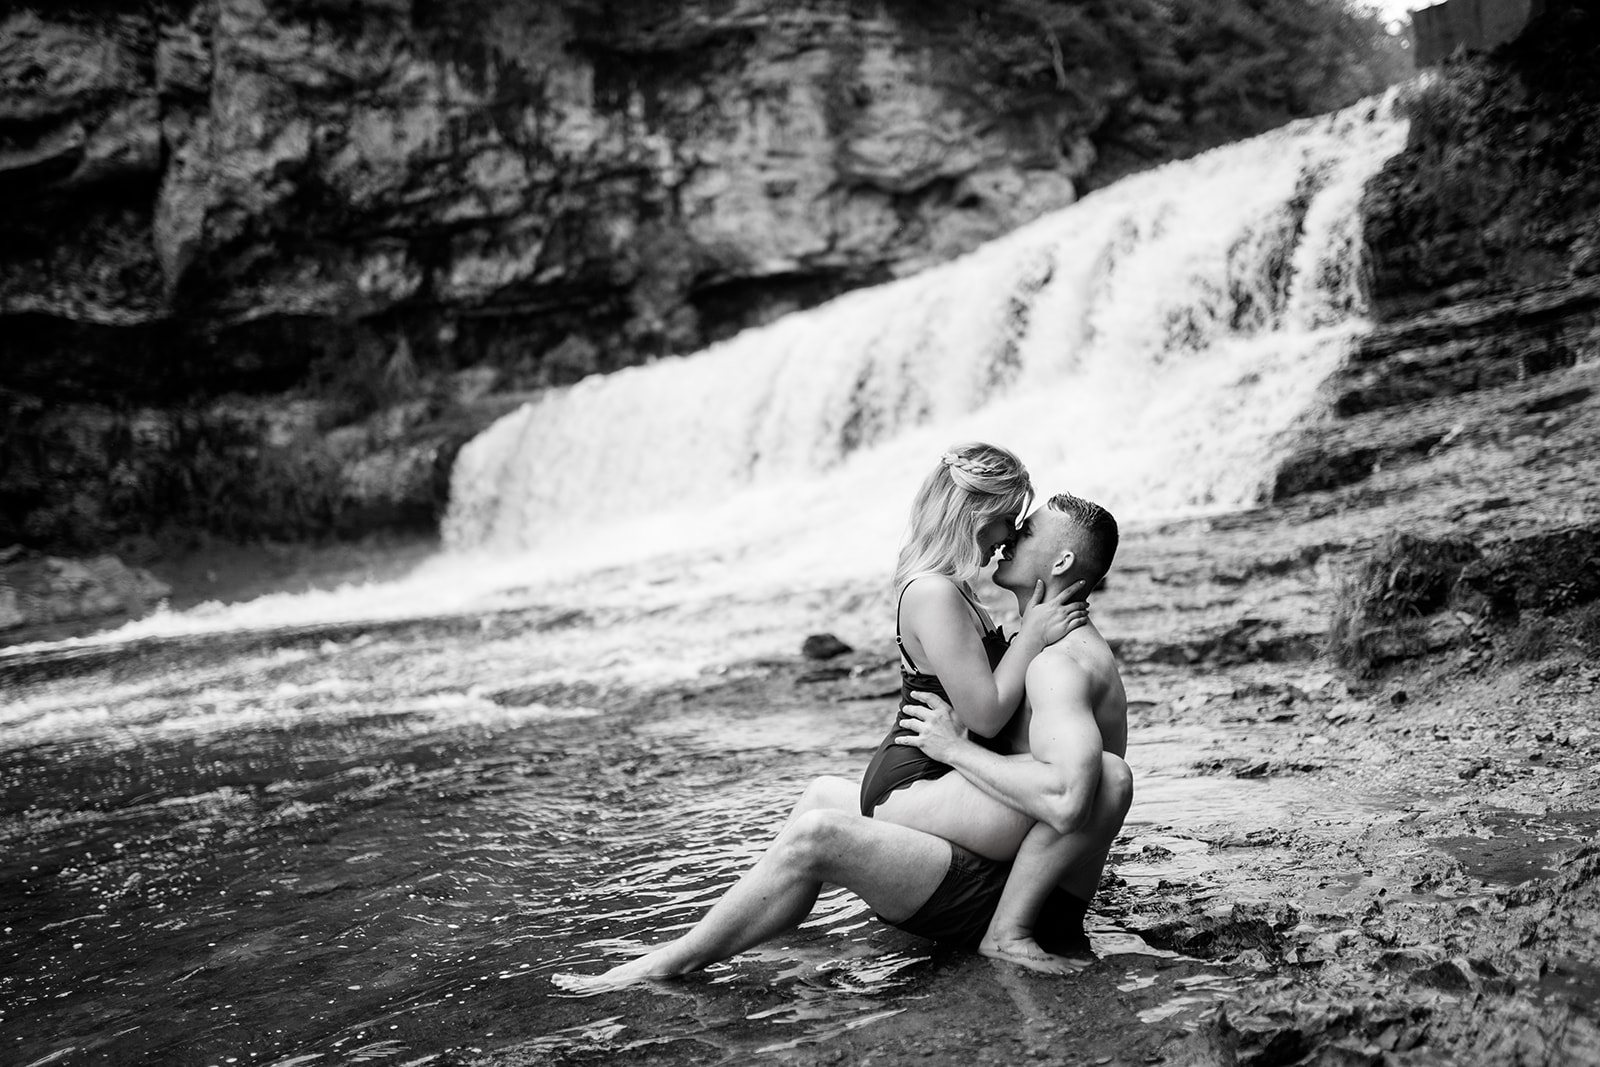 A couple shares a romantic kiss while laying in the river, framed by a majestic waterfall in the background. The serene beauty of nature enhances the intimacy of the moment